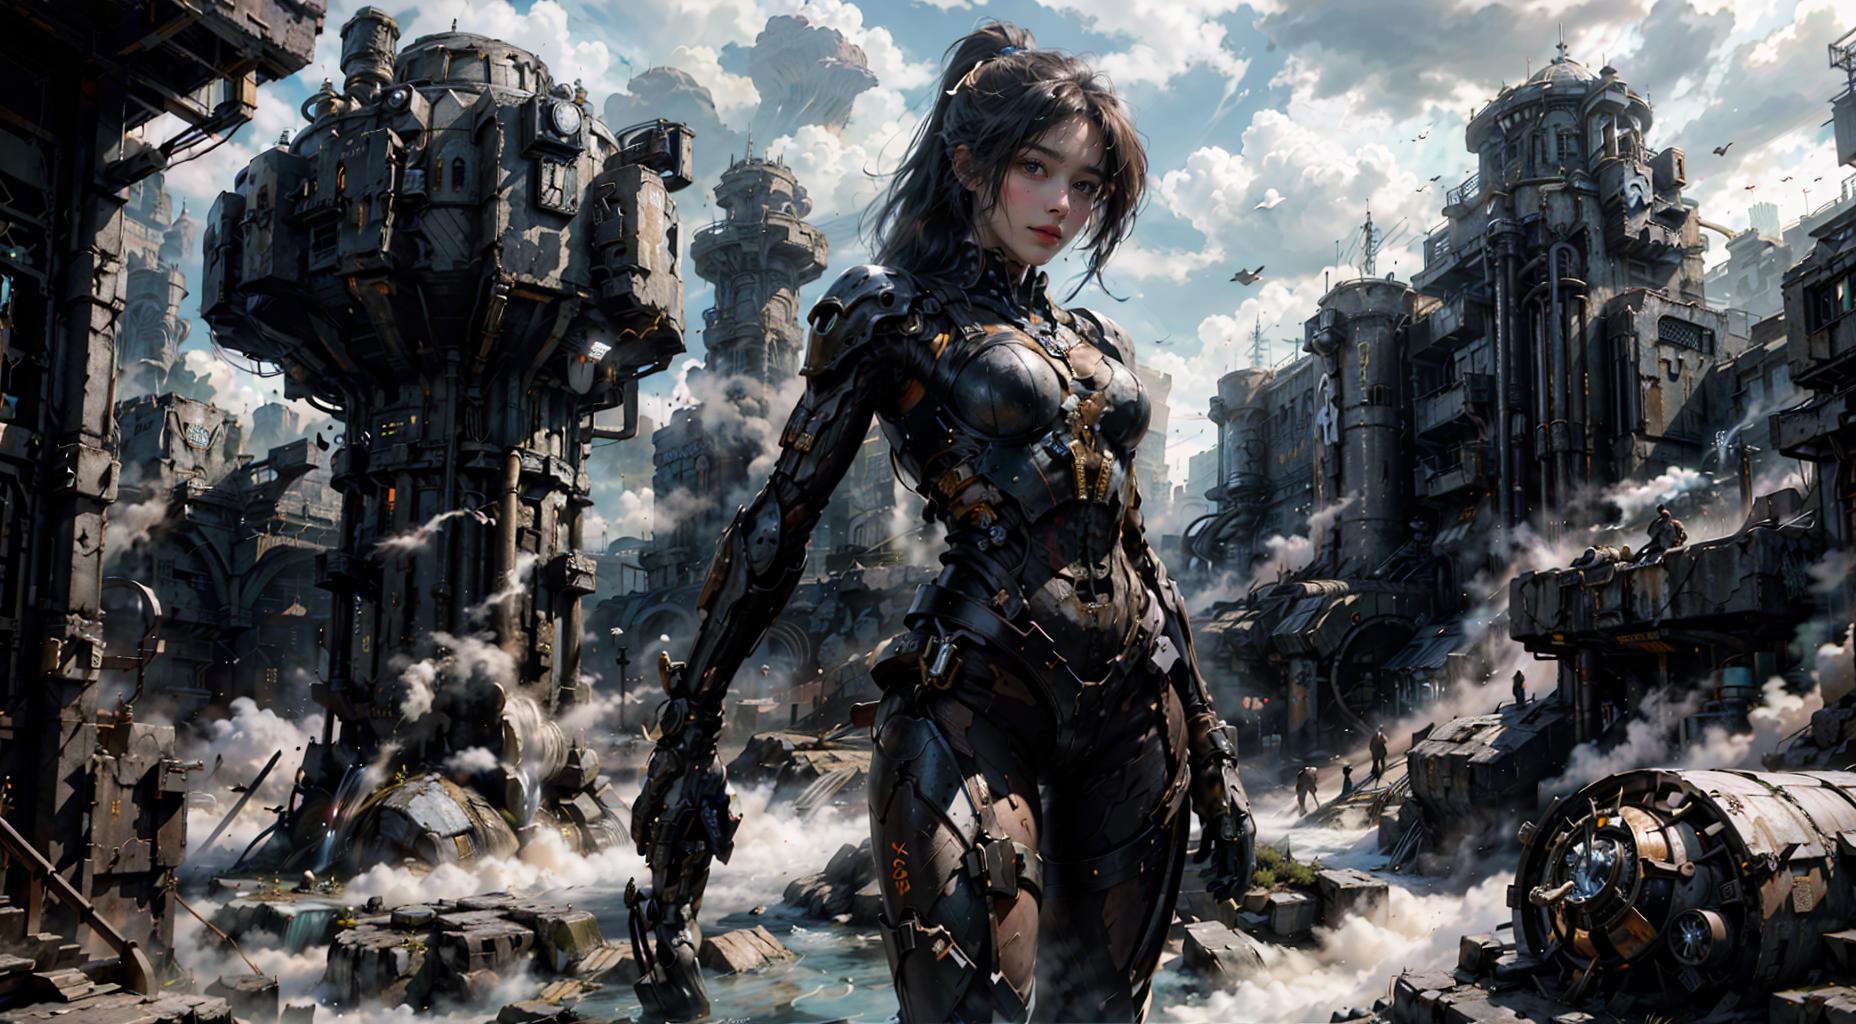 Anime-style, futuristic female warrior with a sword in hand, standing in front of a futuristic cityscape.